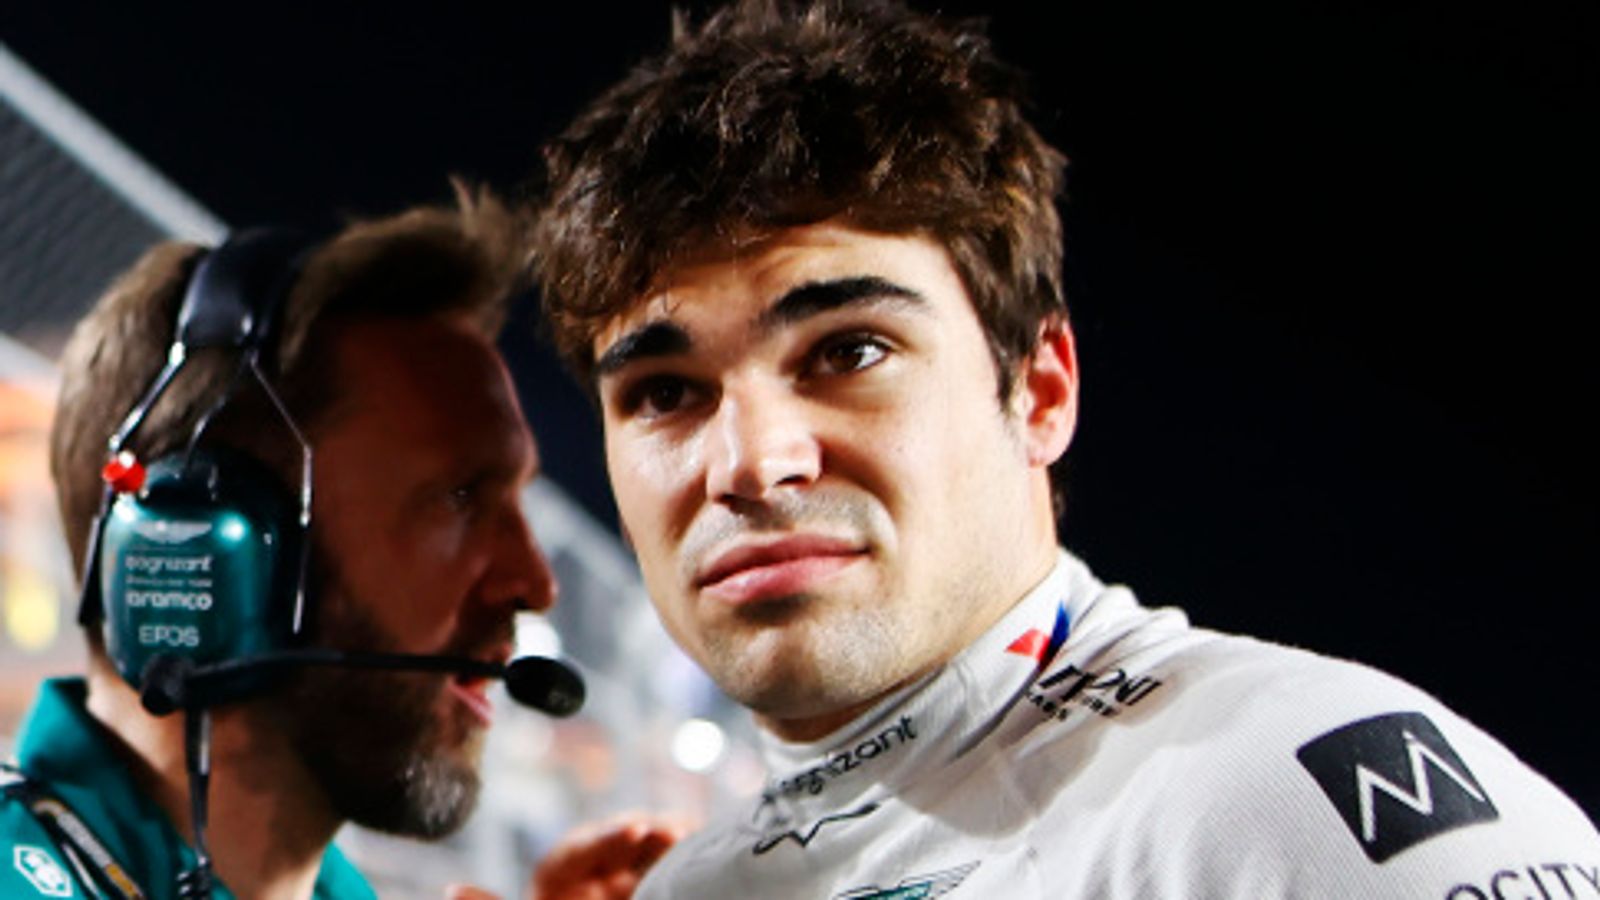 FIA issues Stroll with warning after apology for Qatar incident